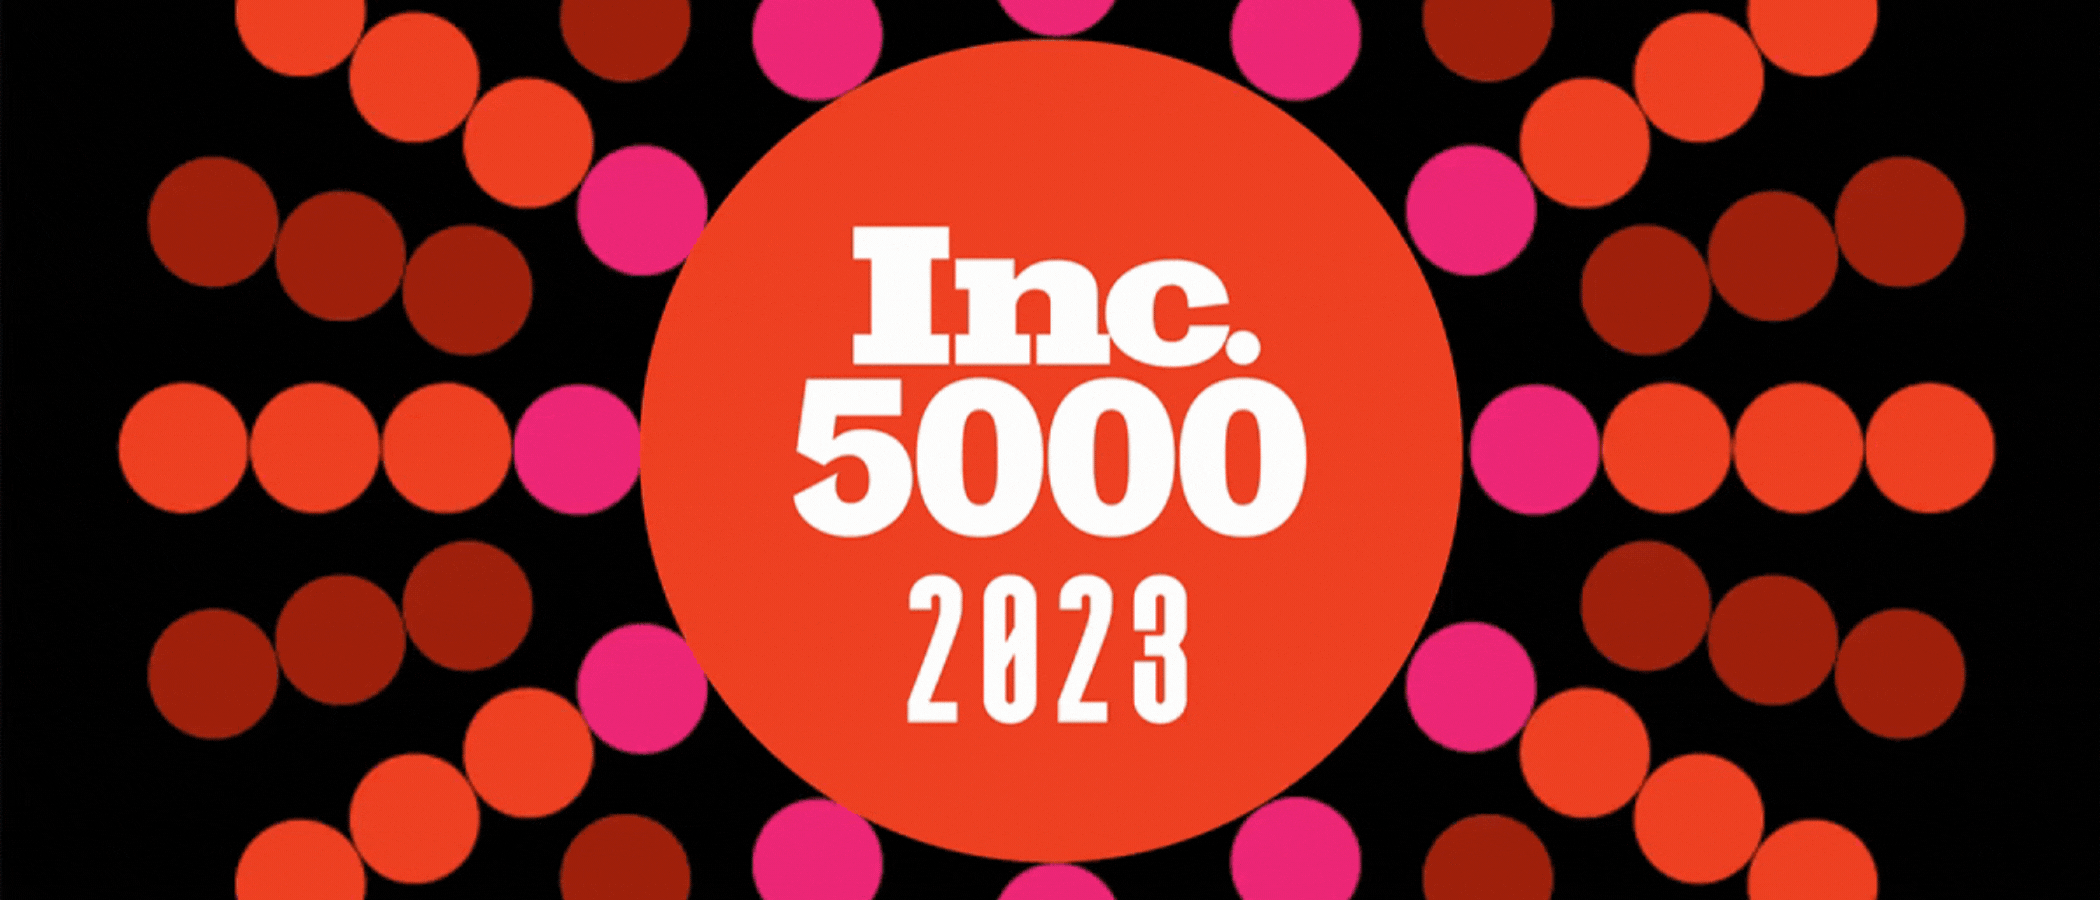 AllVoices Makes The Inc 5000